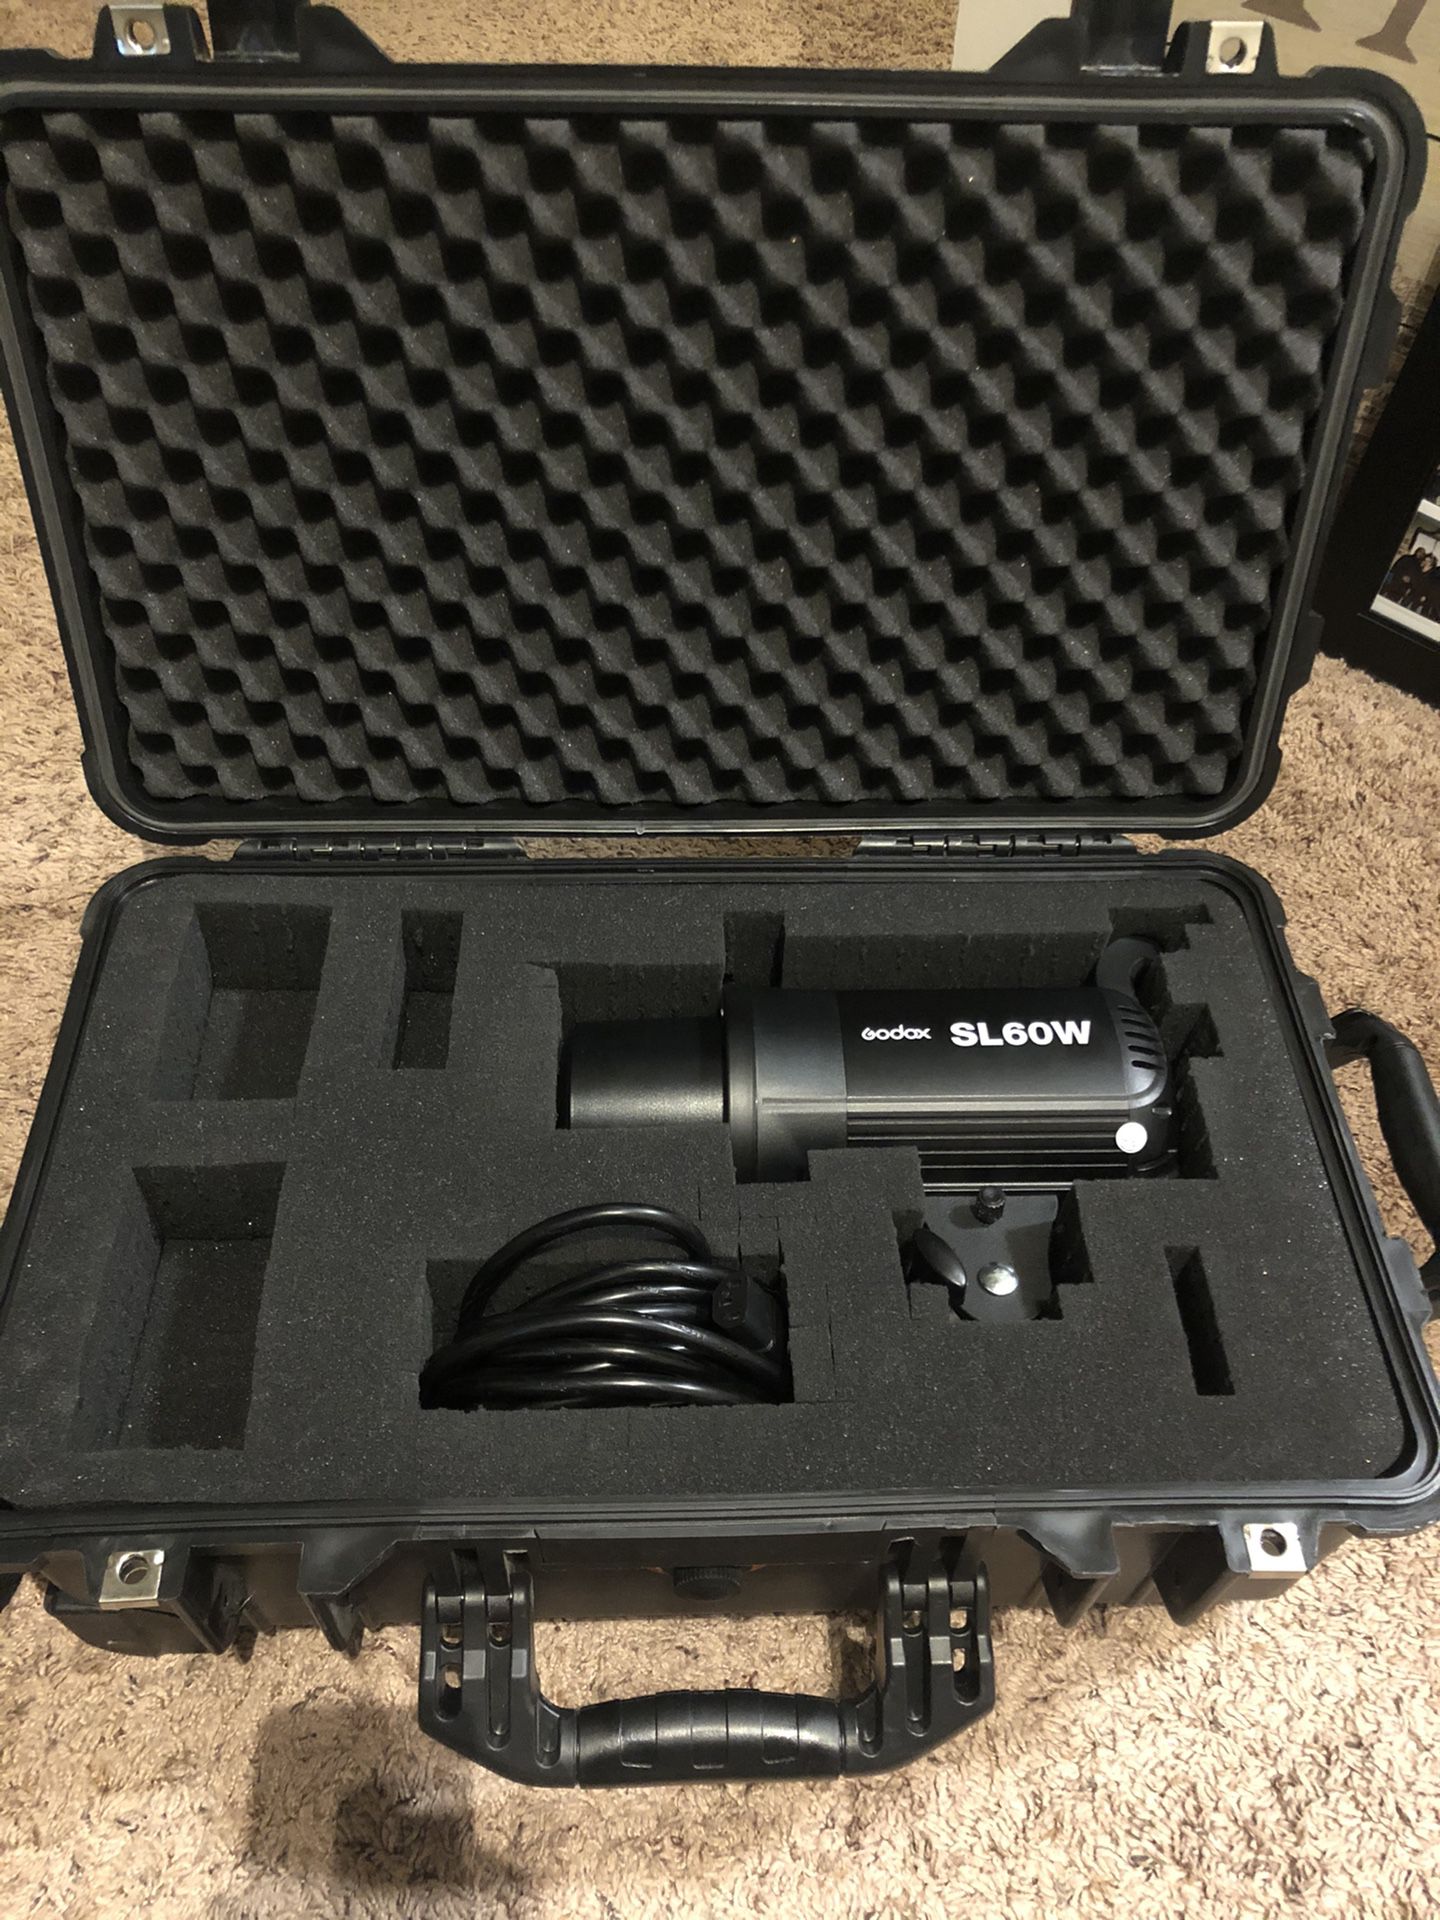 Godox Sl60w video light with softbox and rolling case.